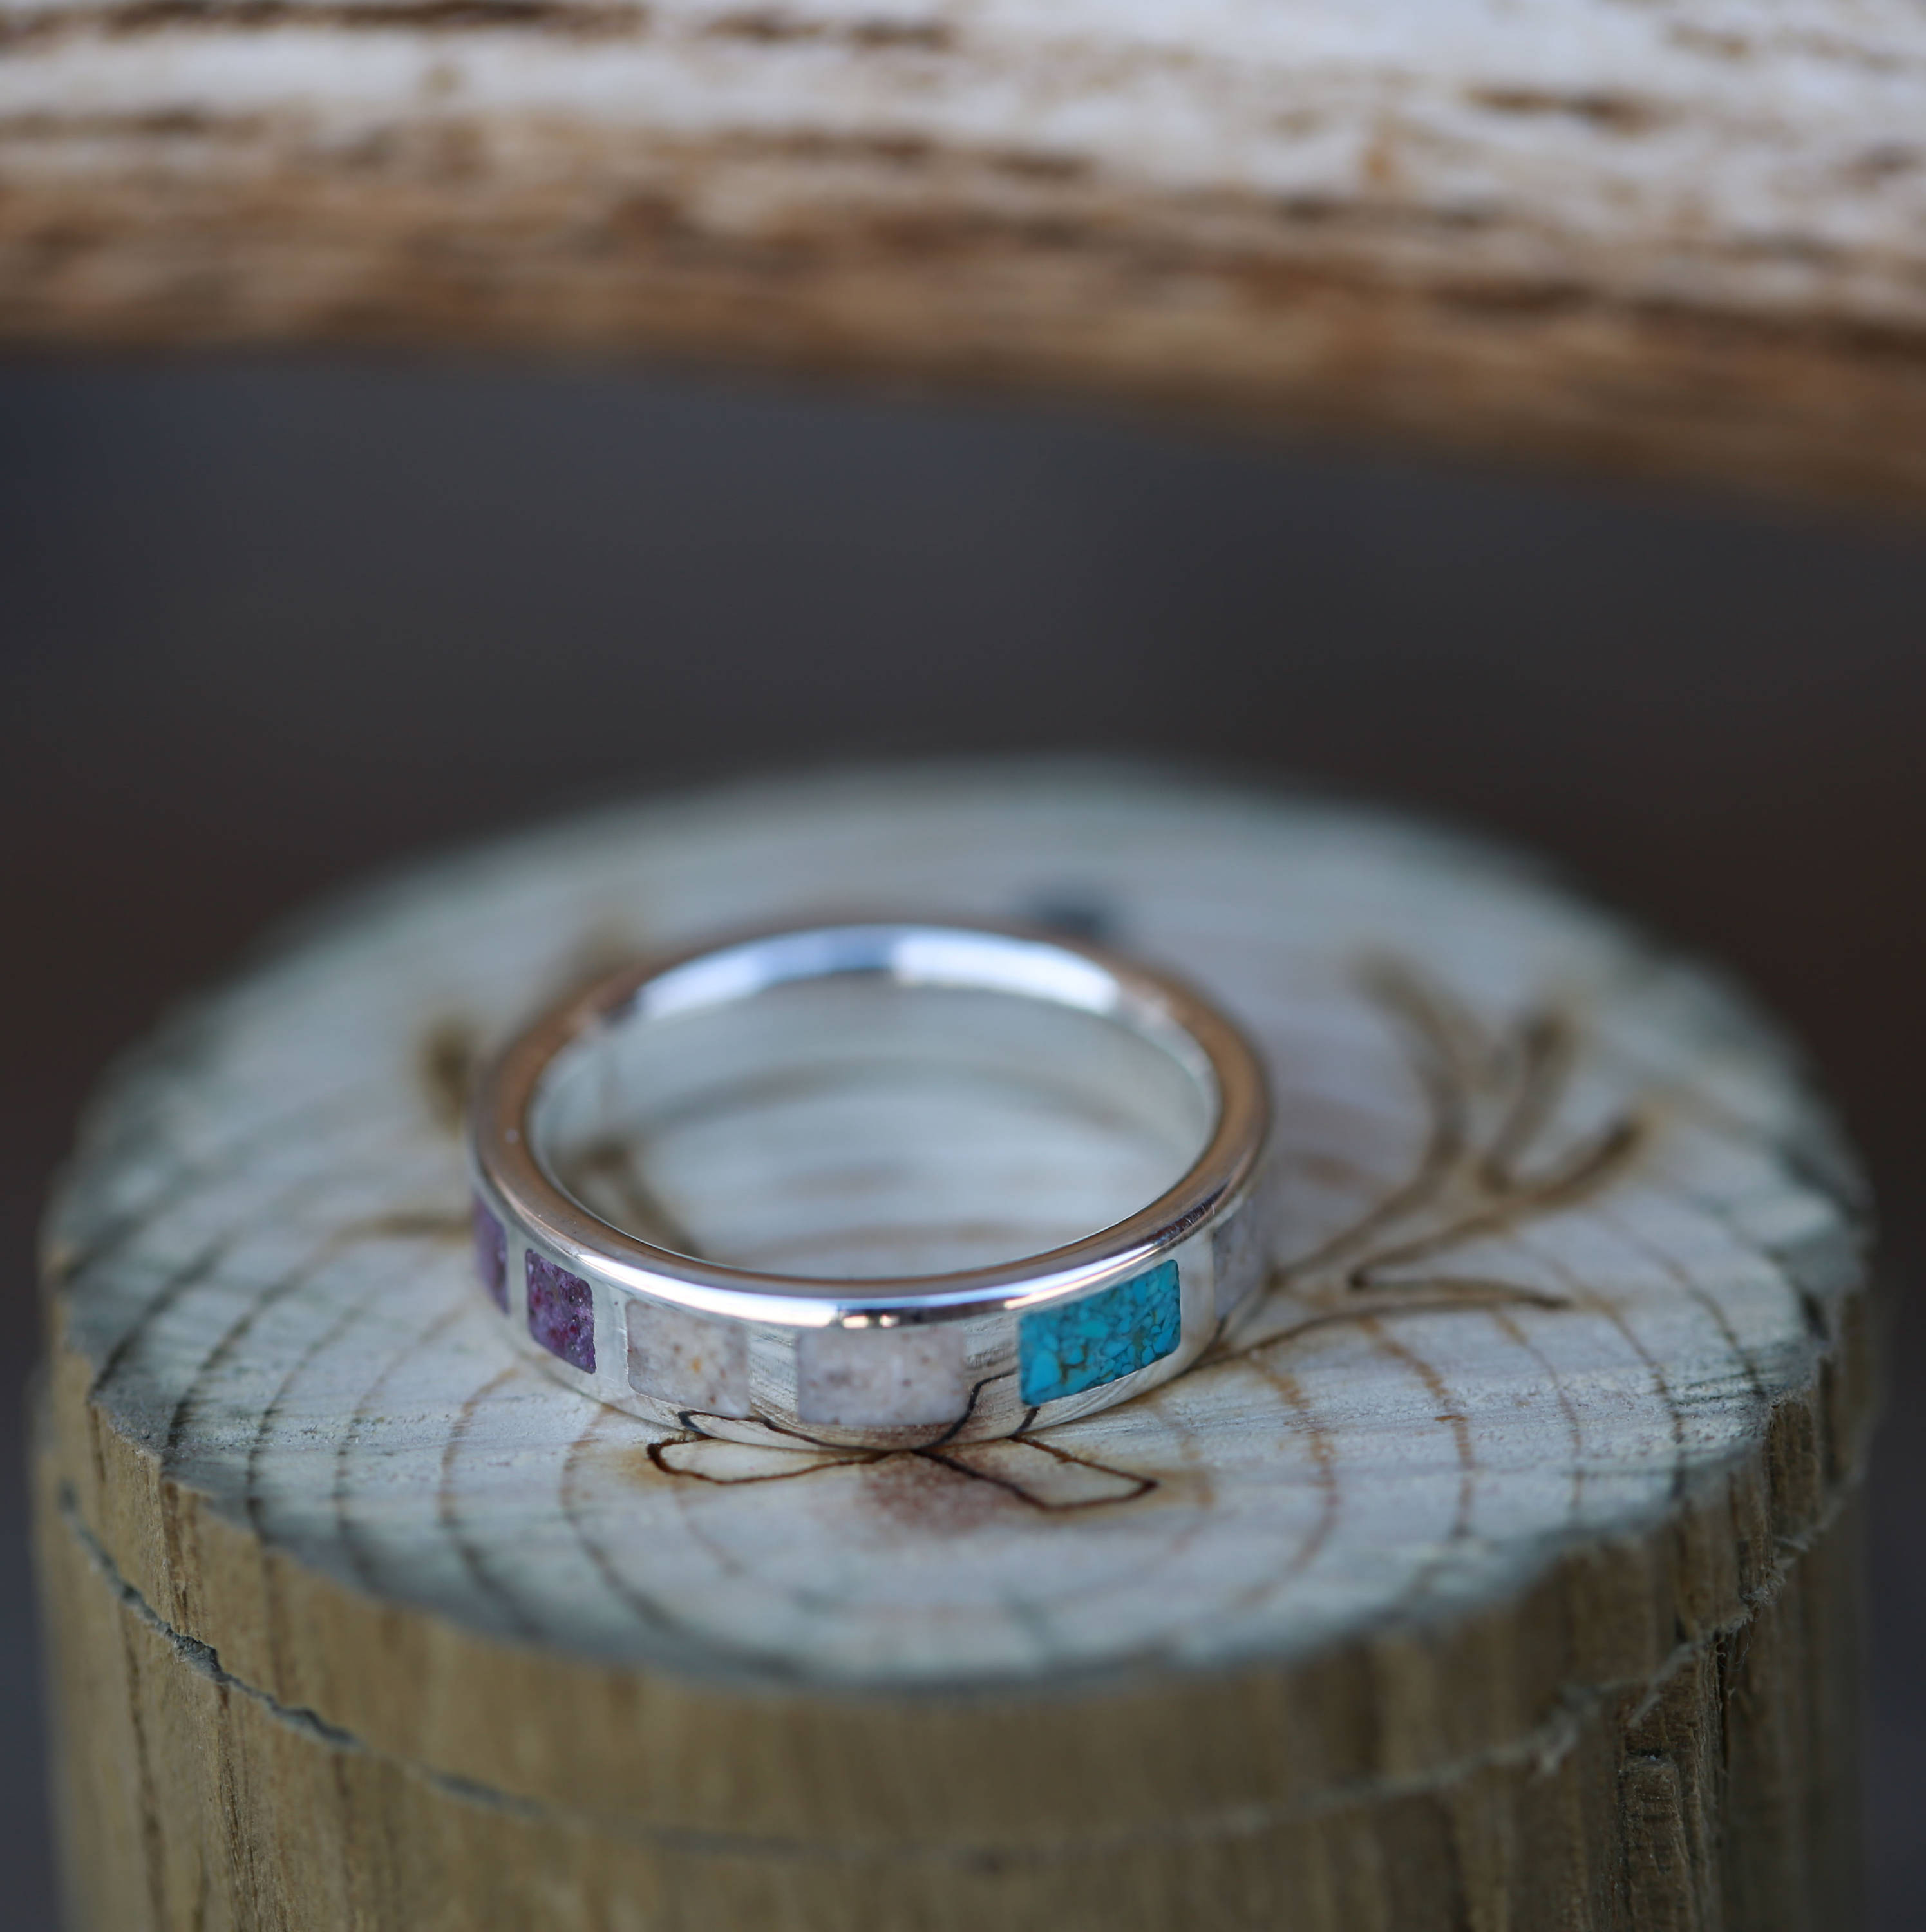 Women's Silver Wedding Band with Charoite Turquoise and | Etsy